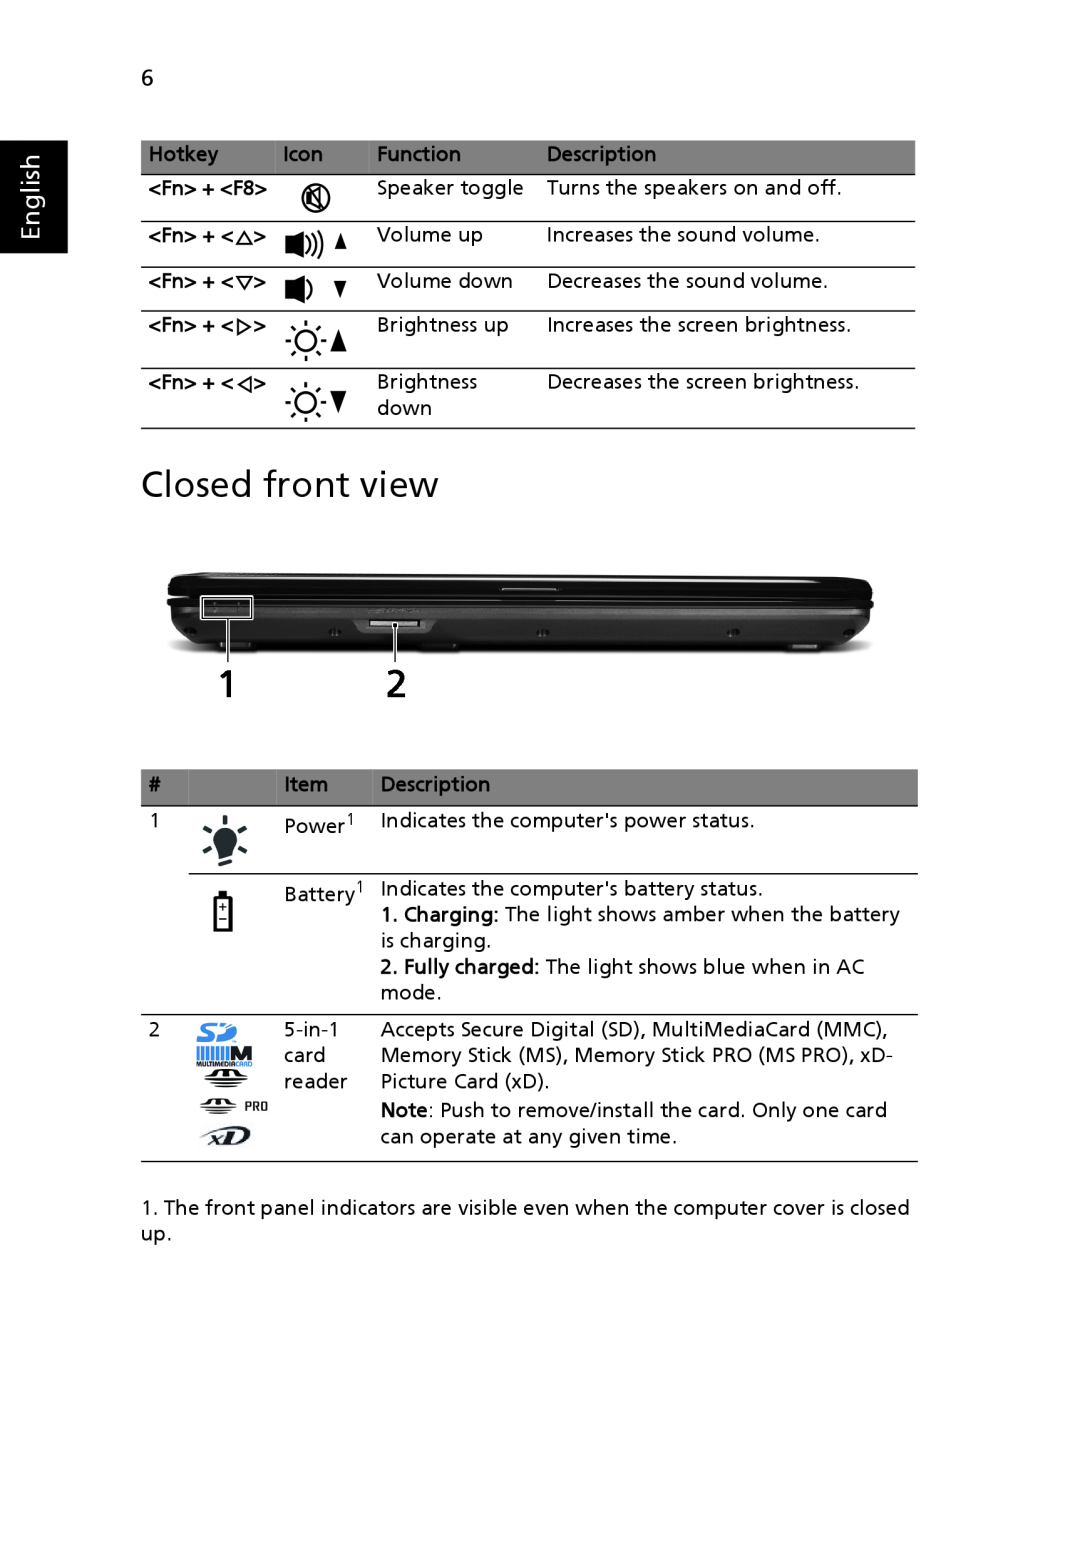 Acer 5516 Series manual Closed front view, English 